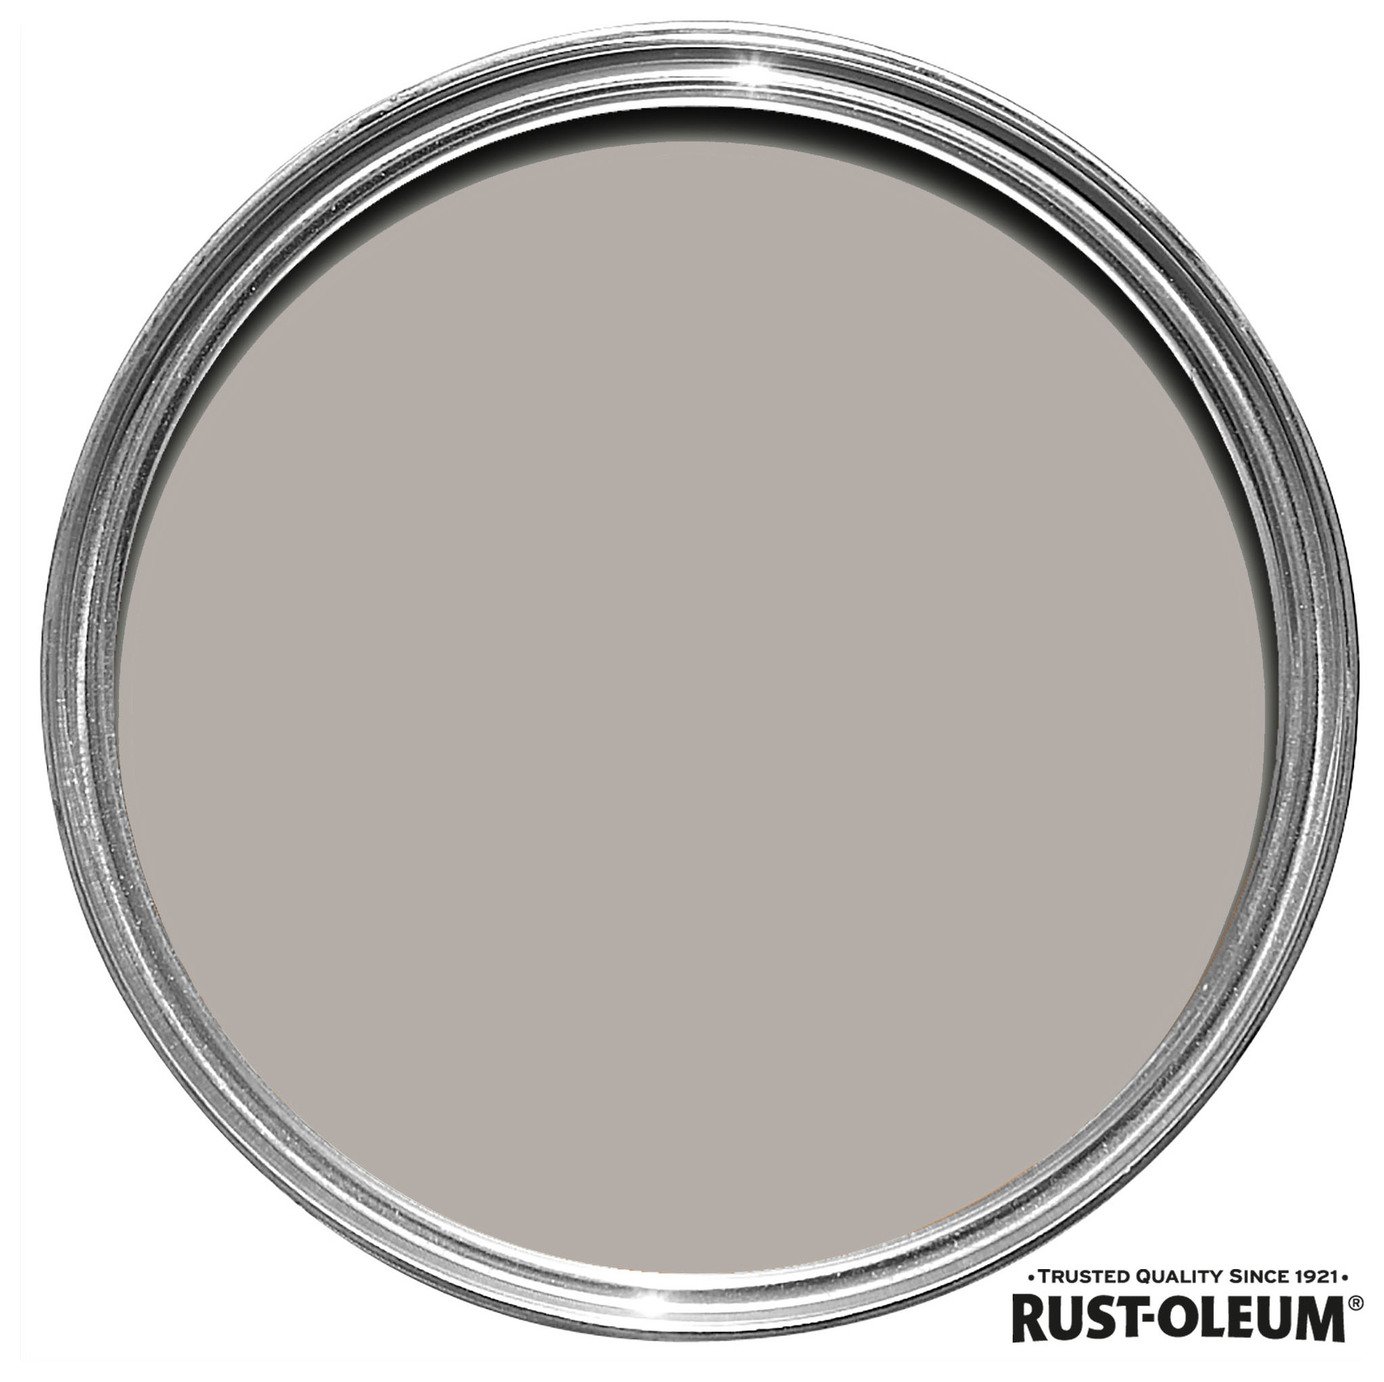 Rust-Oleum Weathered Wood Paint 750ml Review